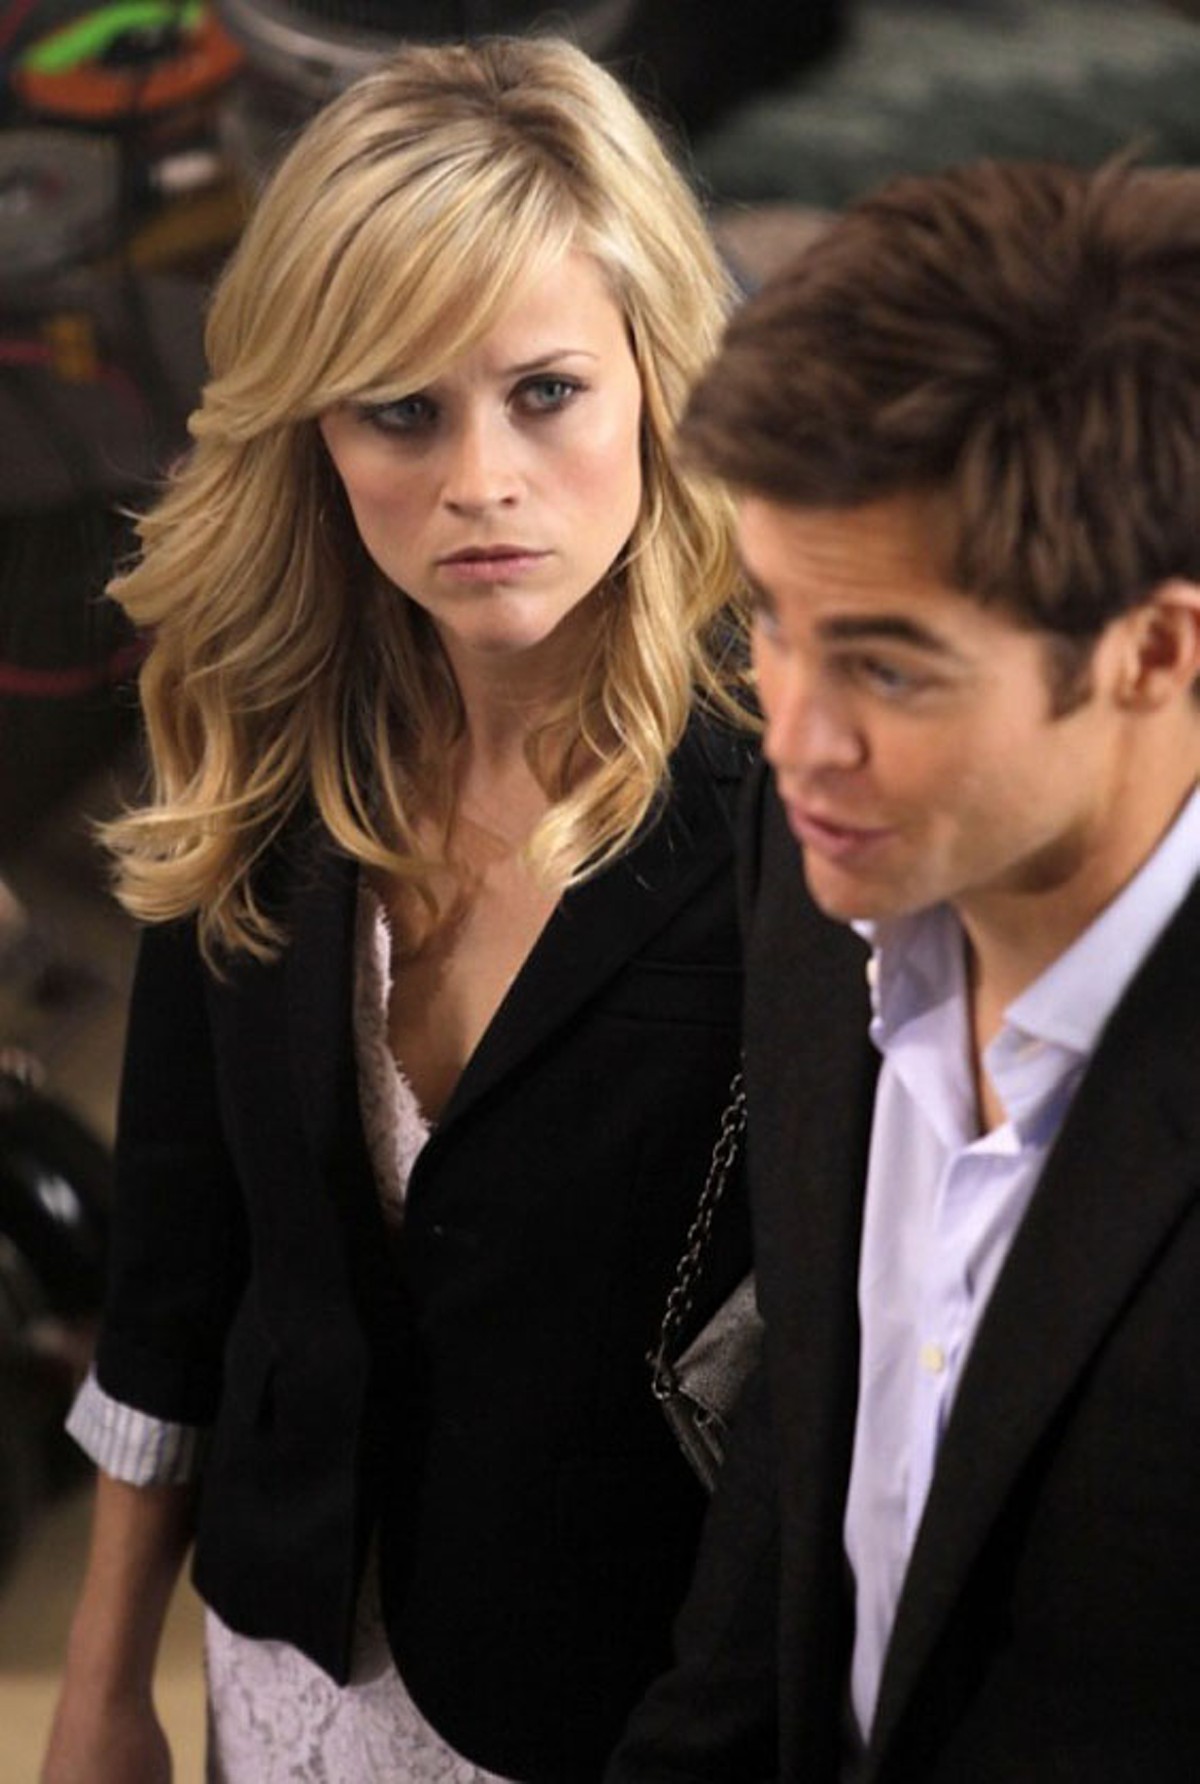 Waving the white flag: Reese Witherspoon and Chris Pine in This Means War.